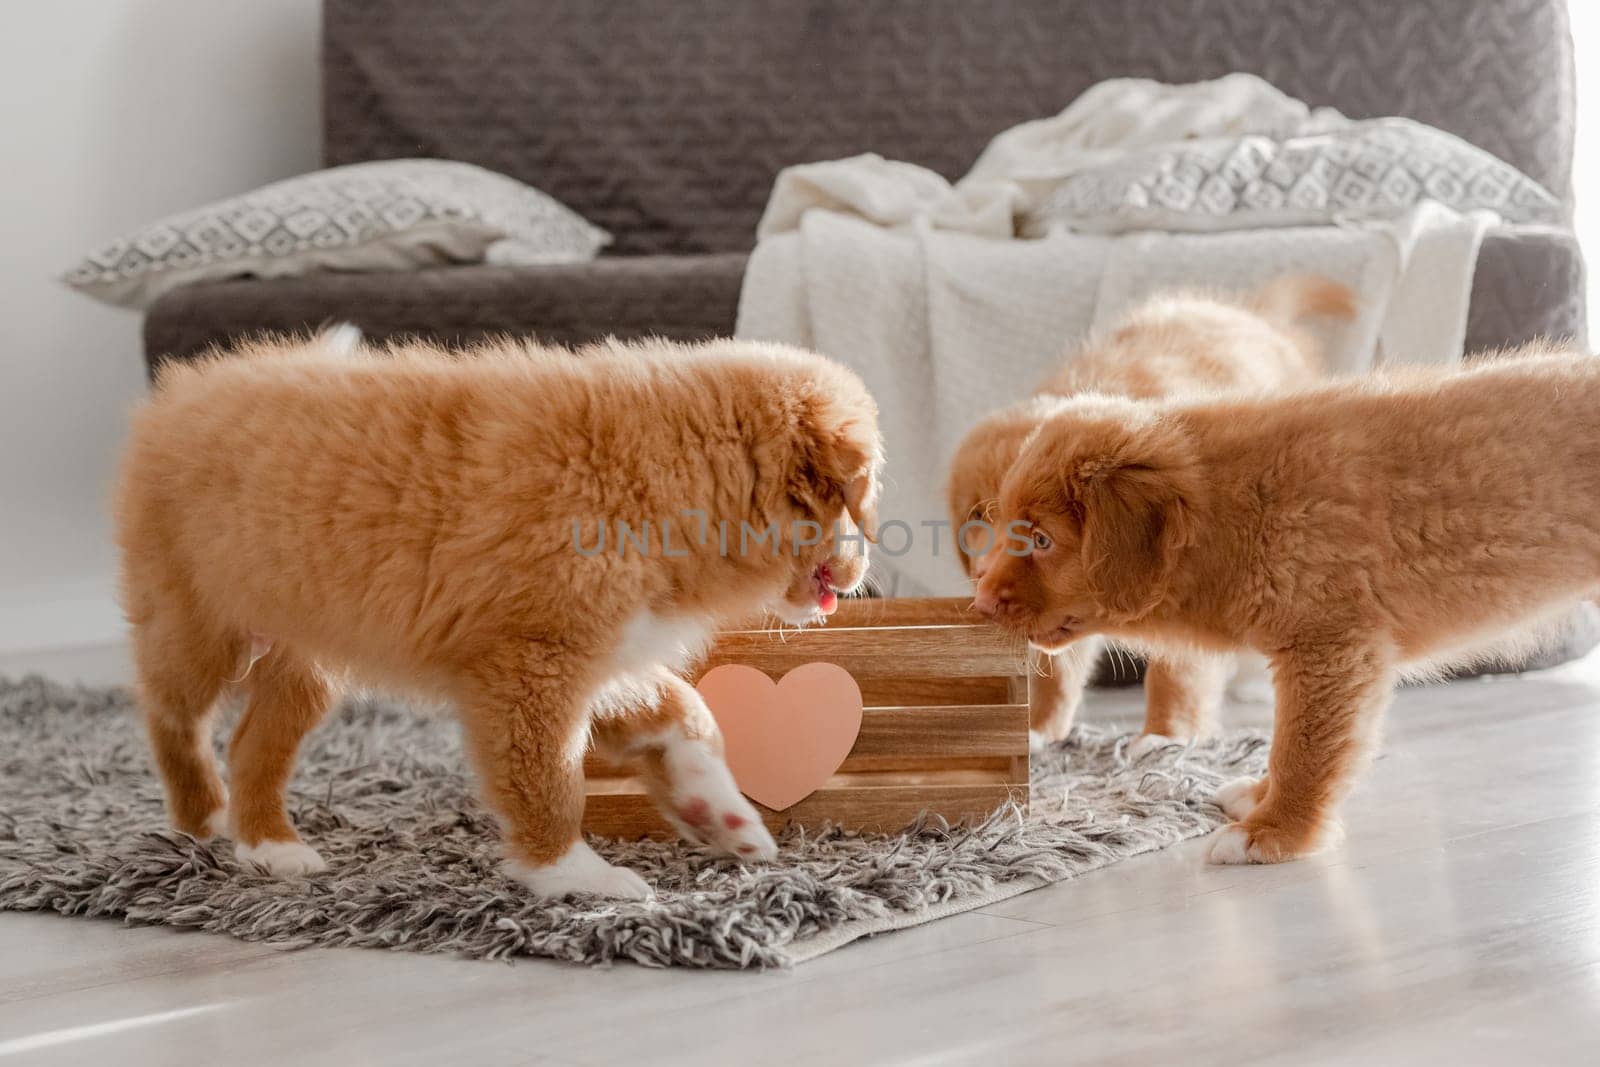 Toller Puppies Are Playing With A Wooden Box On The Floor In A Room, Showcasing The Playful Nature Of The Nova Scotia Duck Tolling Retriever Breed